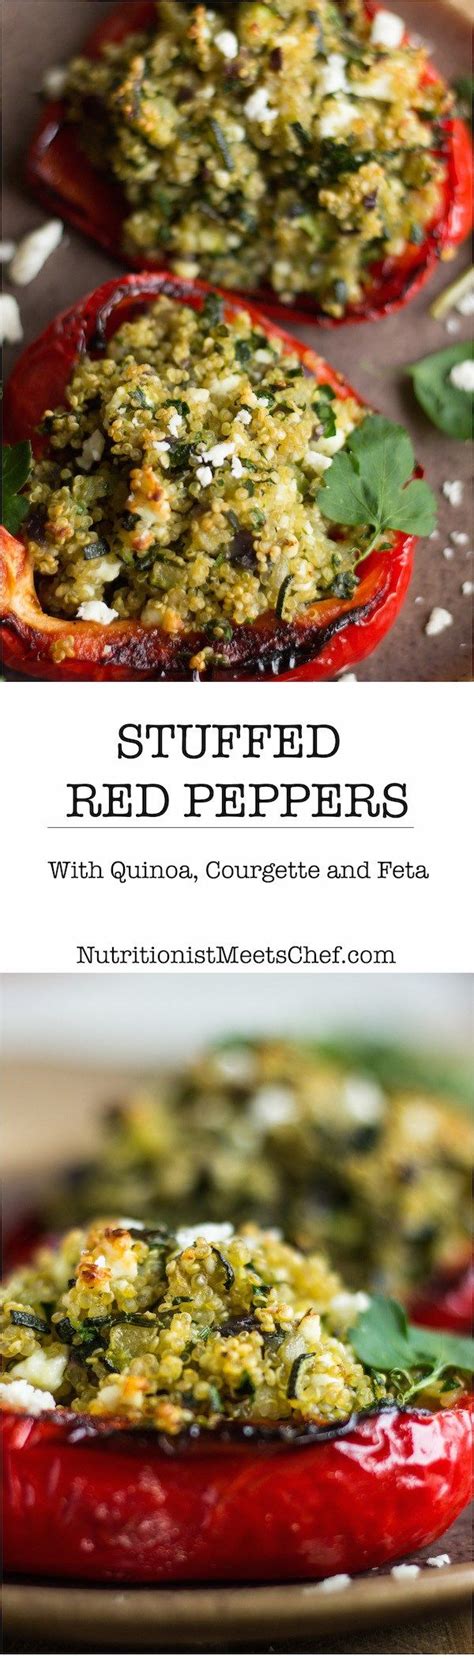 Stuffed Peppers With Quinoa Courgette And Feta Nutritionist Meets